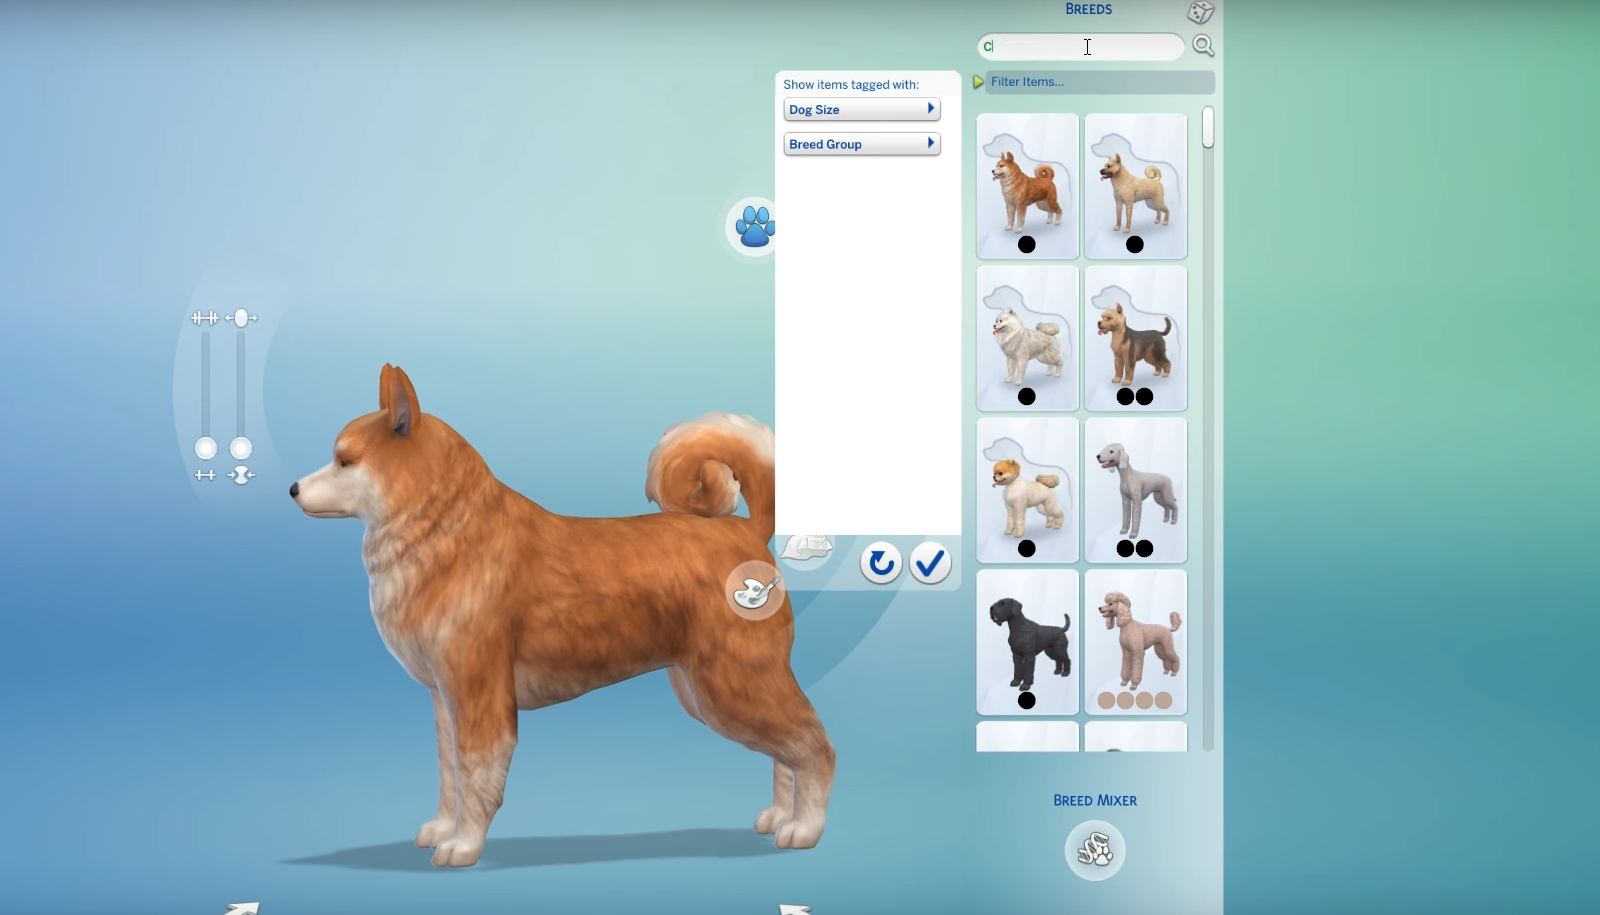 The Sims 4 Cats & Dogs: Complete List of Pet Breeds (170+) | SimsVIP